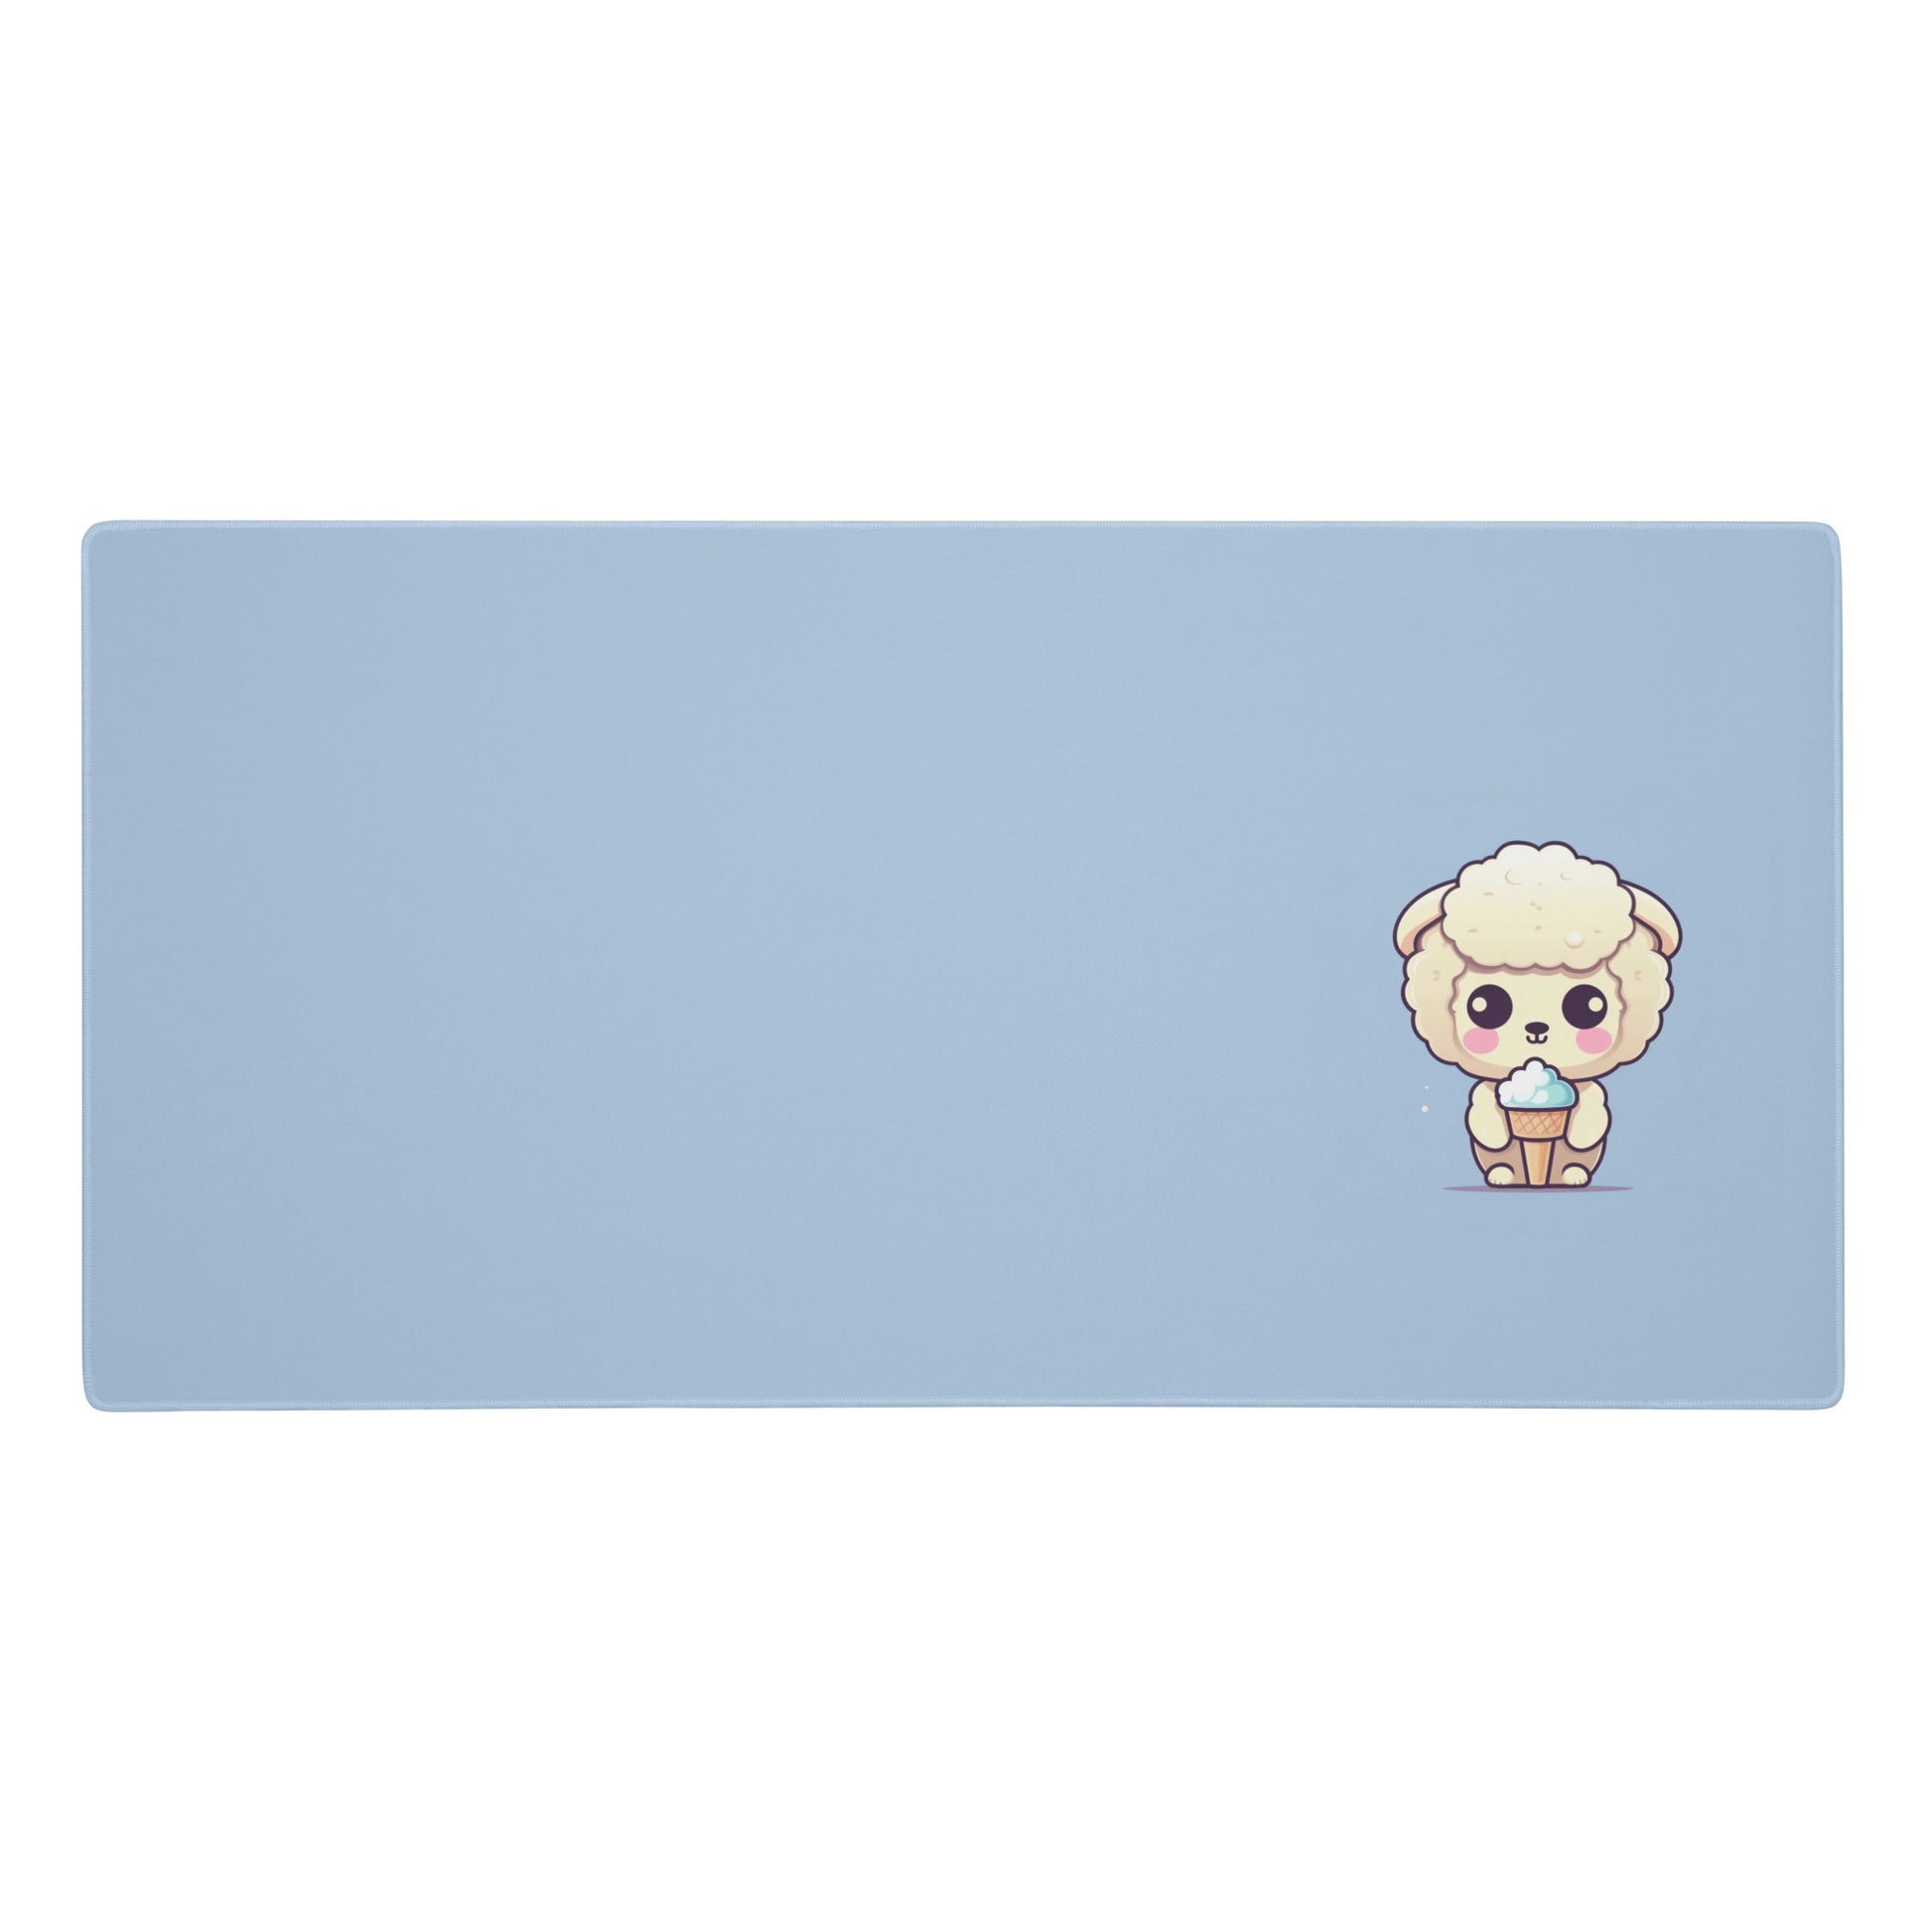 A 36" x 18" desk pad with a cute sheep eating ice cream on it. Blue in color.